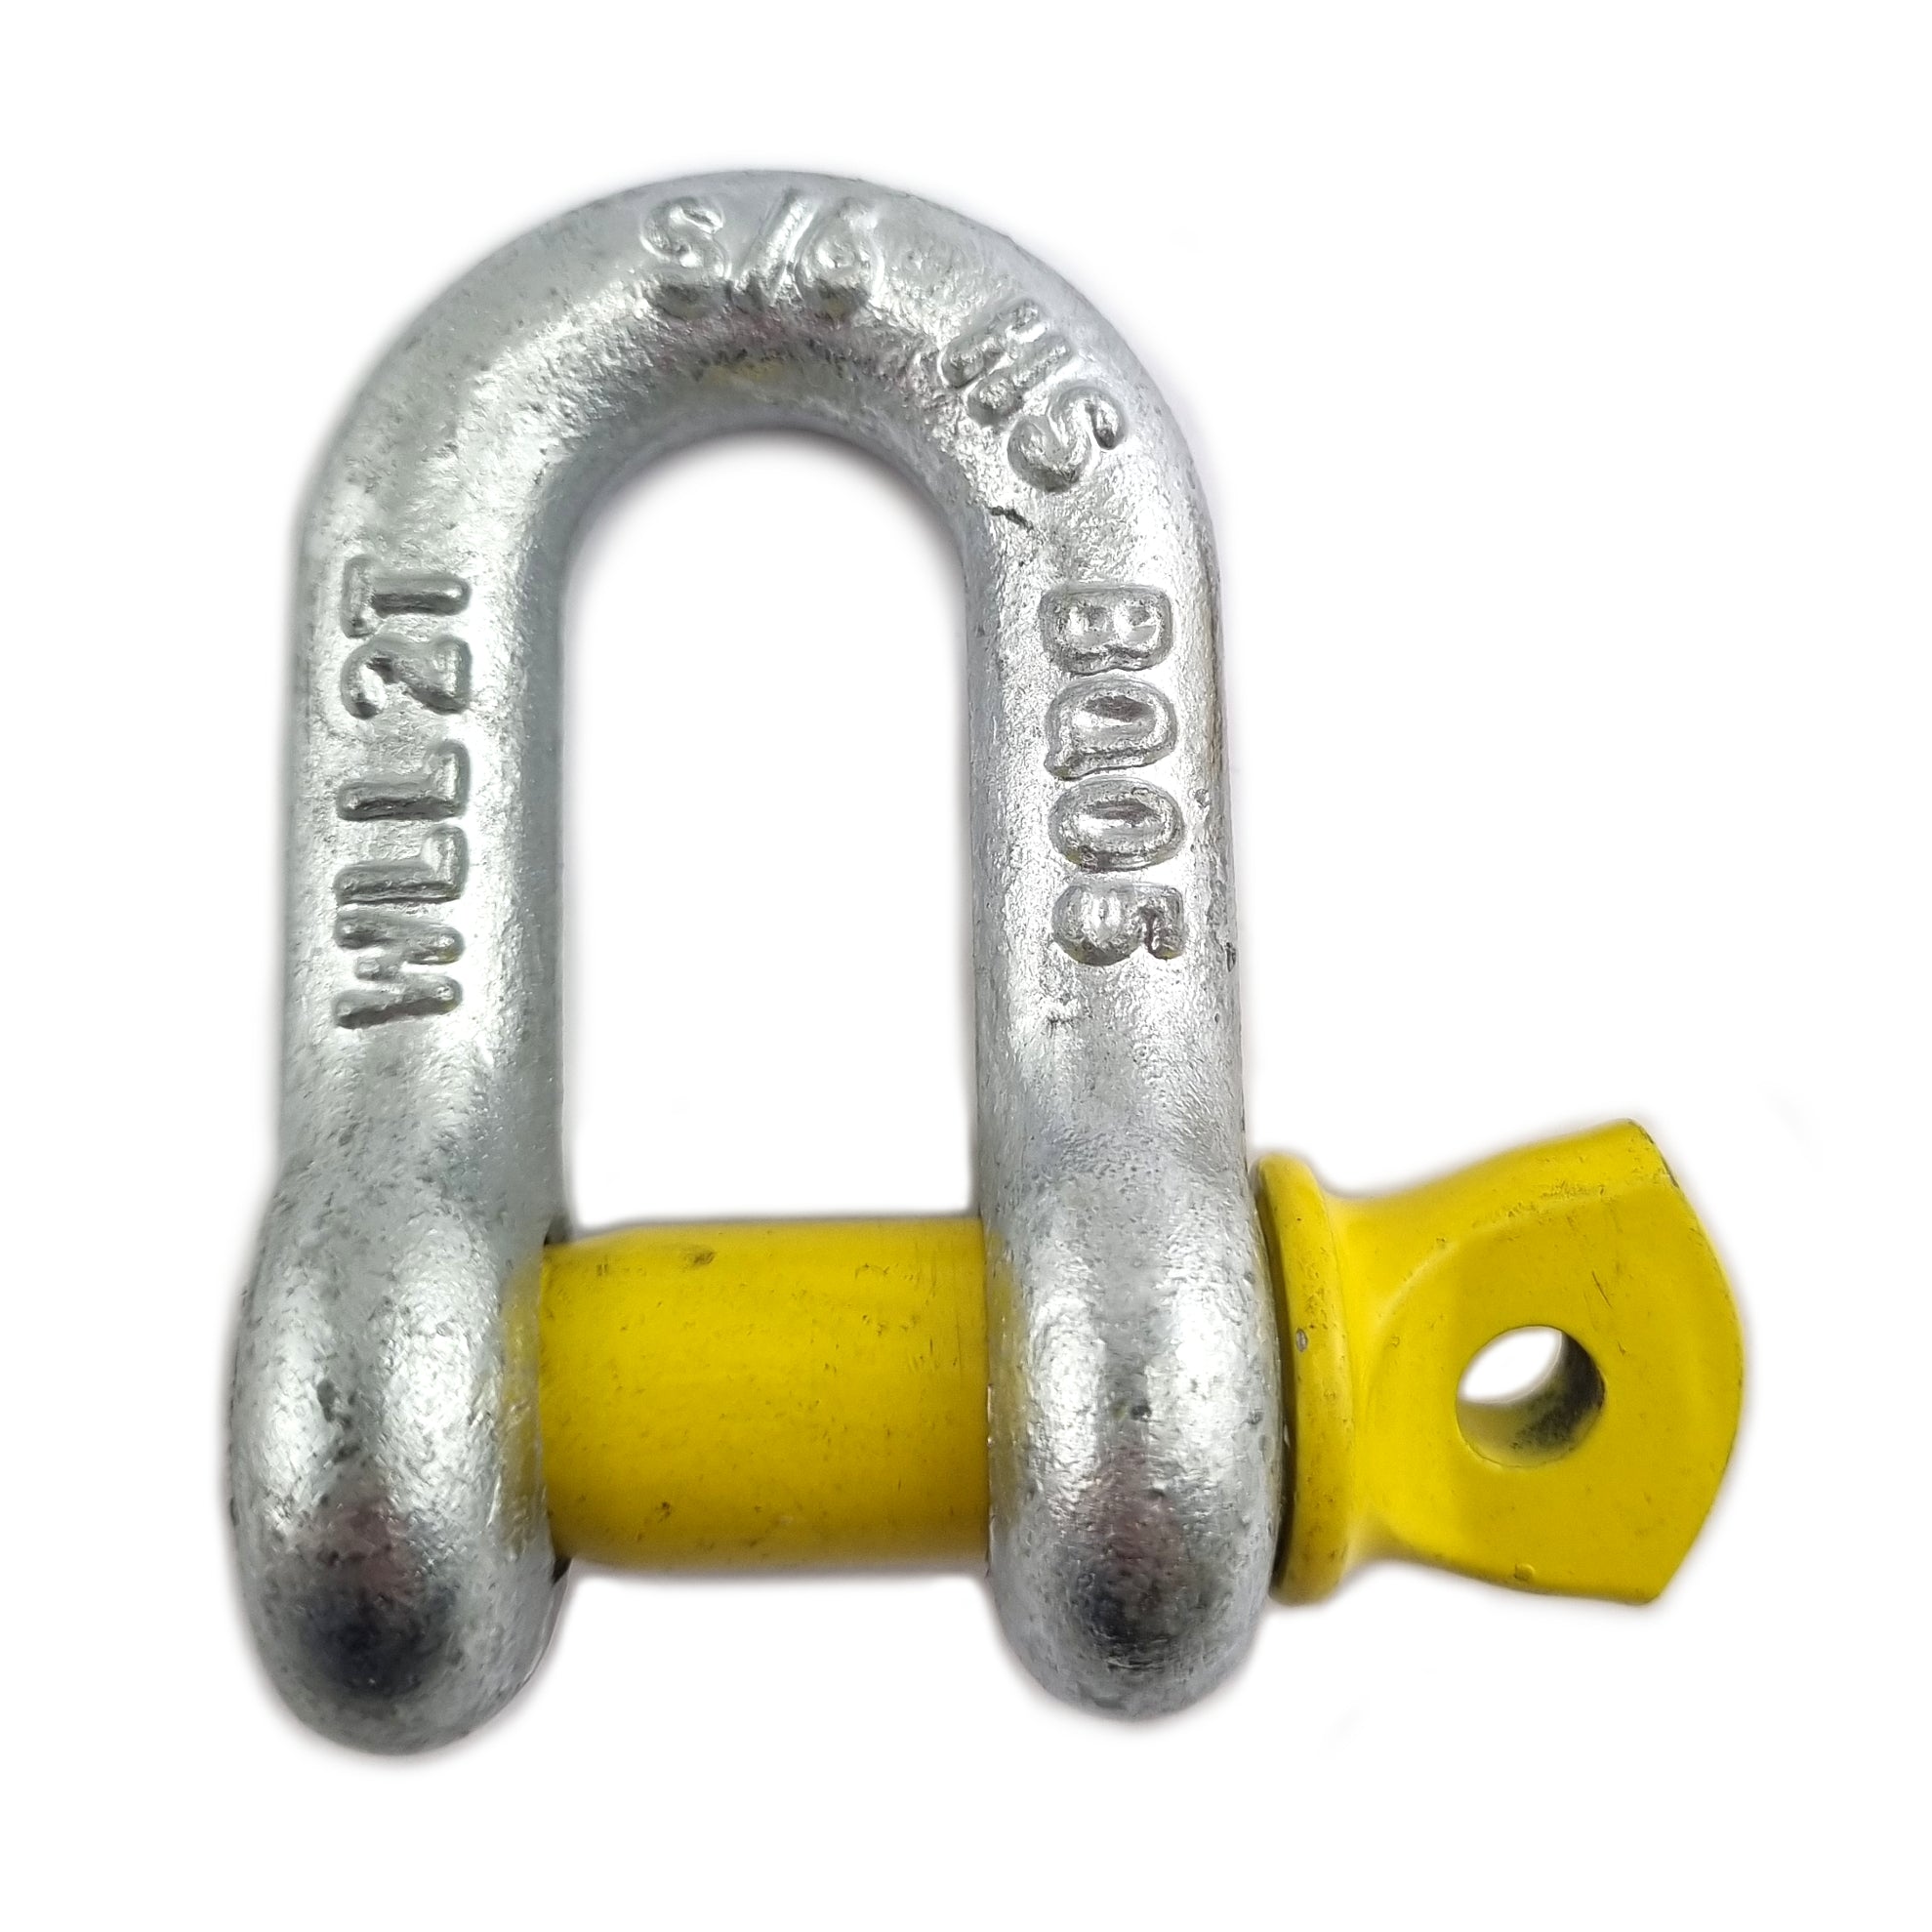 Galvanised and yellow D shackles, grade S, rated D shackle. Australia wide shipping. Shop hardware chain.com.au